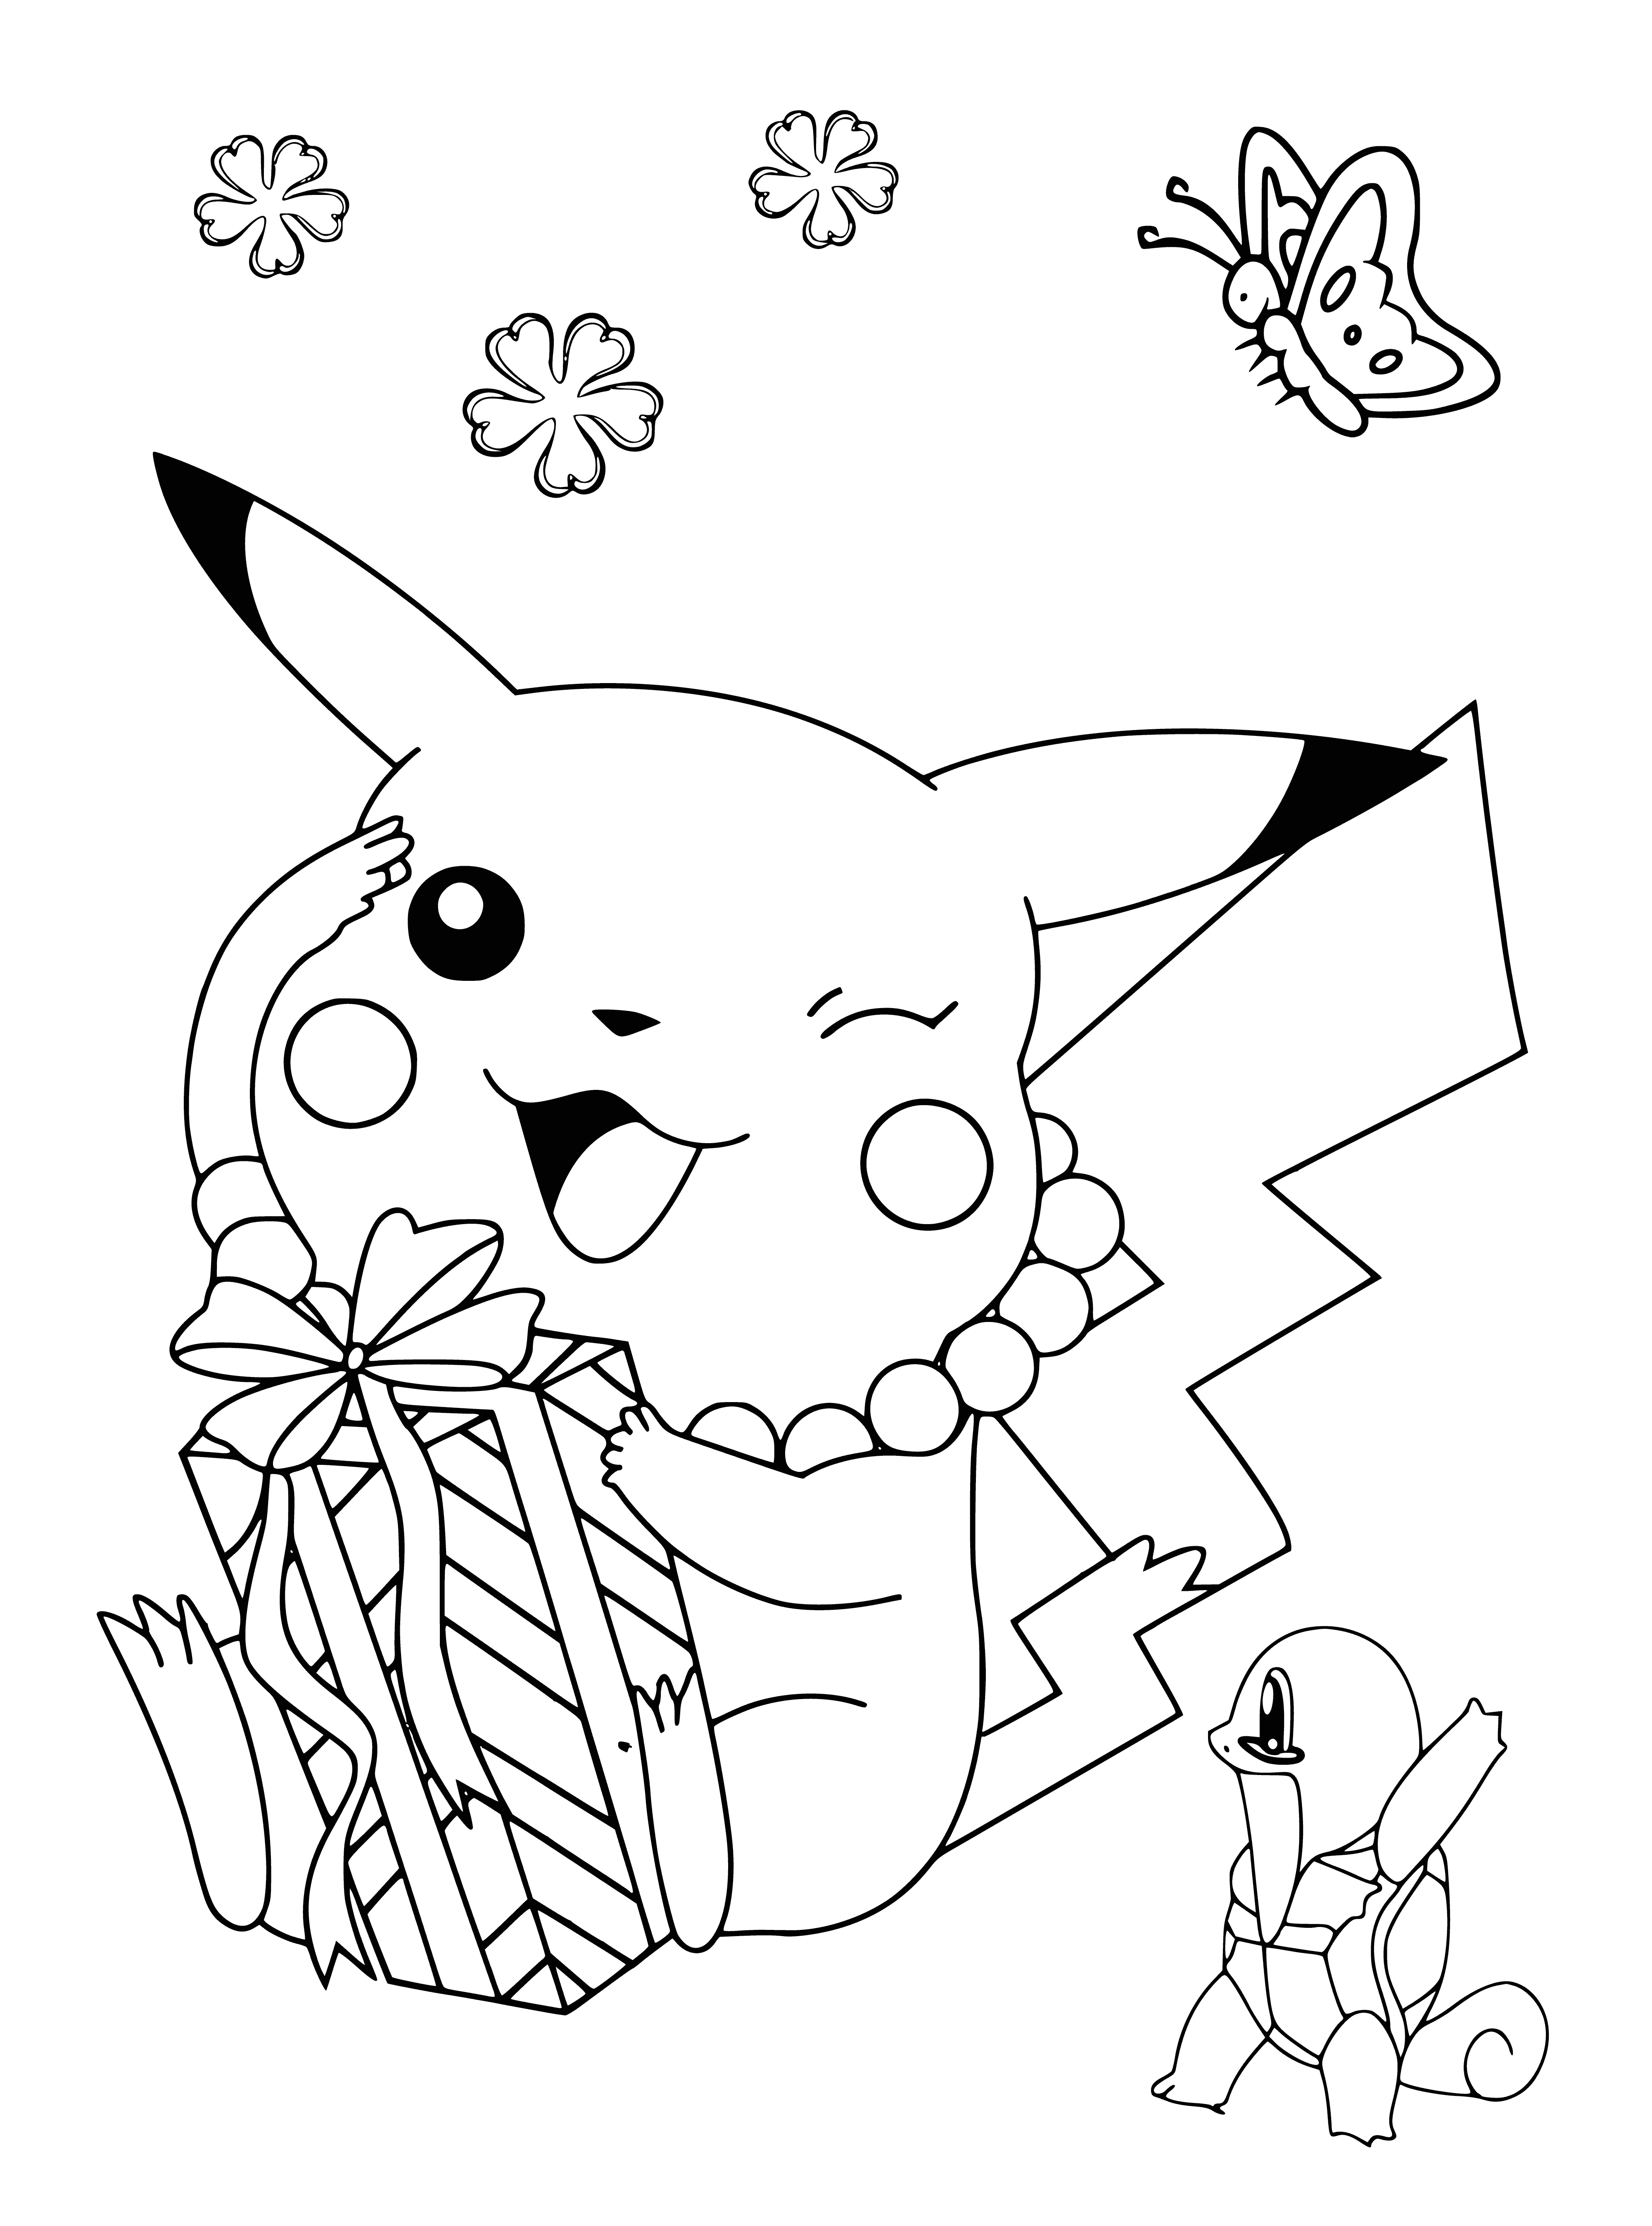 coloring page: Pikachu sits on a log with a gift, topped with a big red bow.